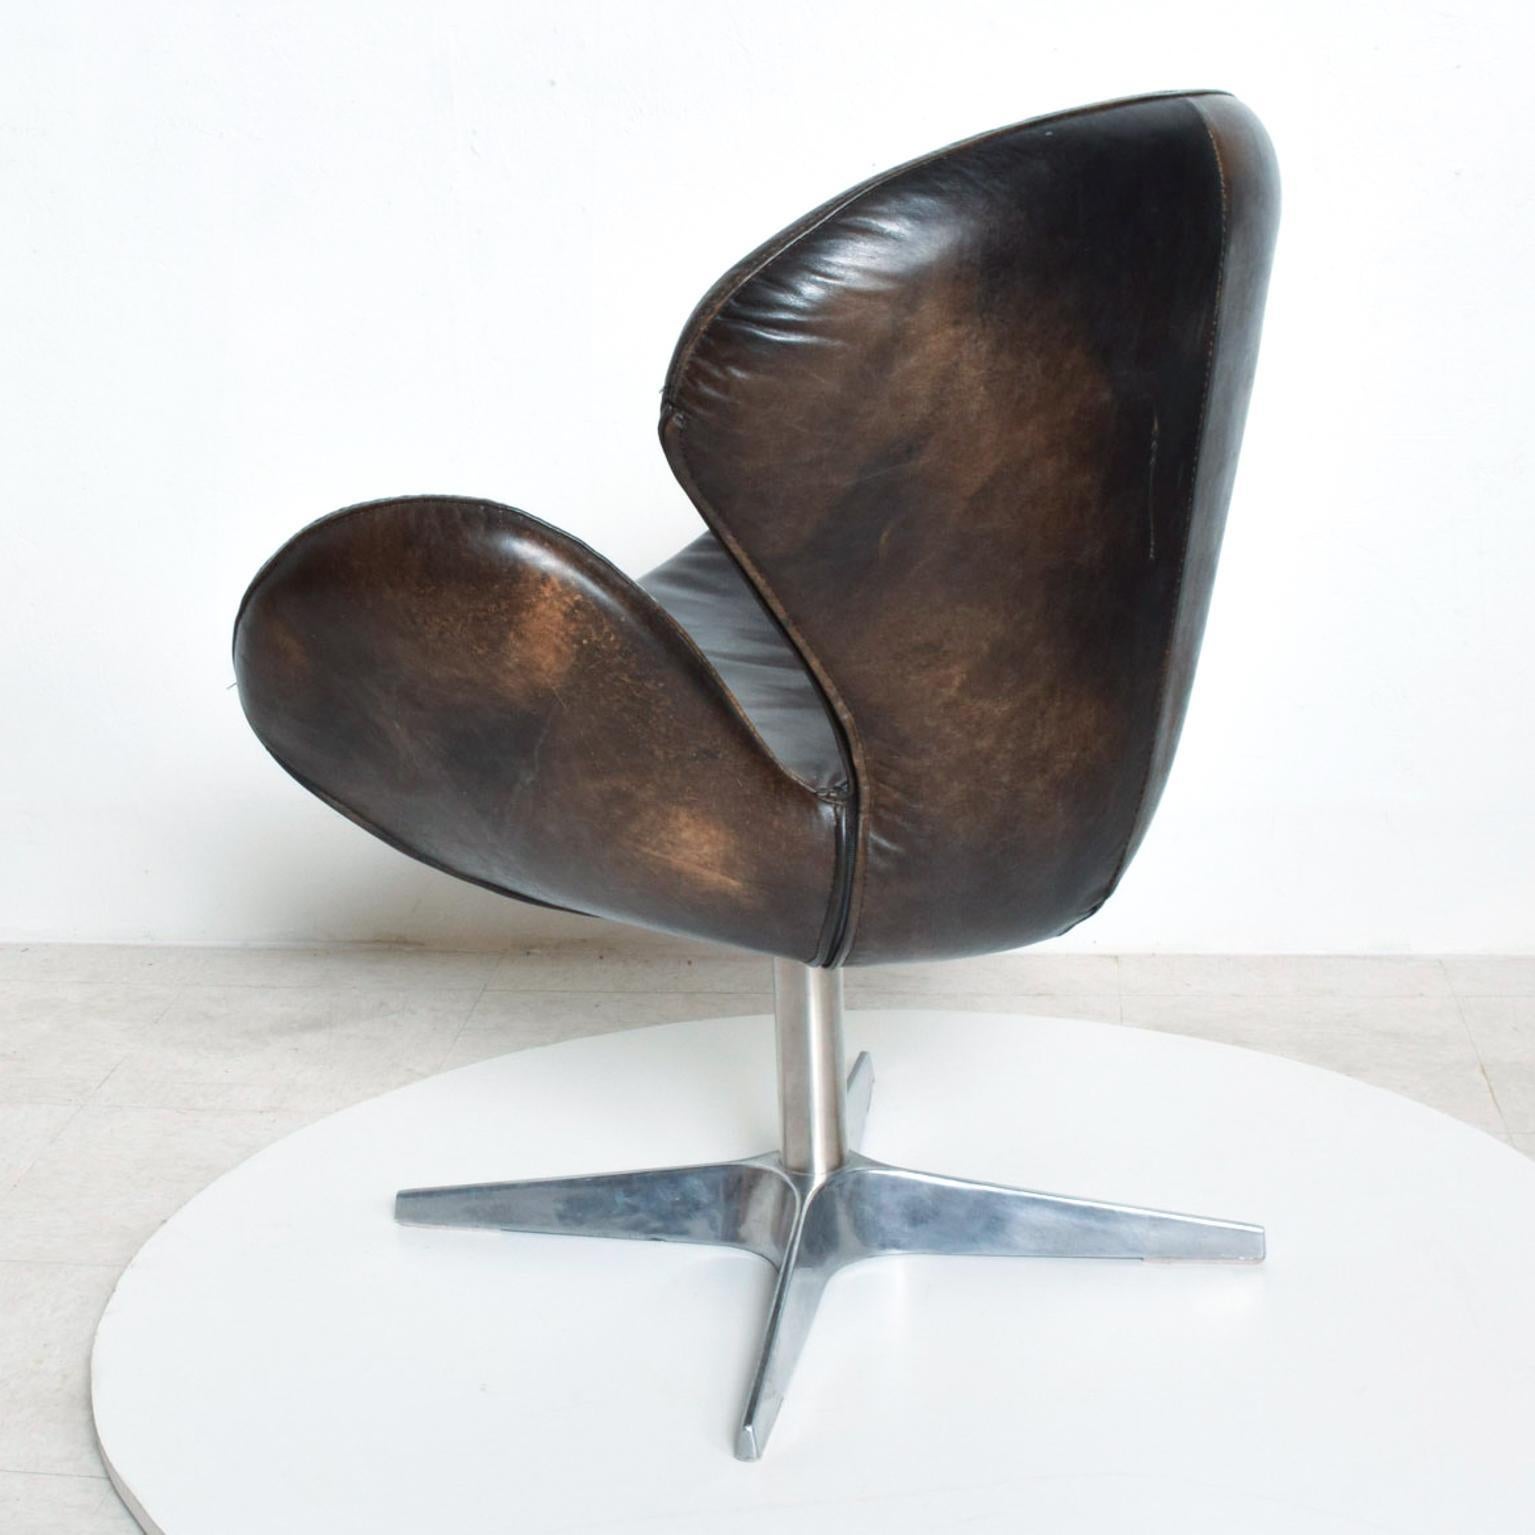 Late 20th Century Mid-Century Modern Lounge Swivel Chair Style Swan by Arne Jacobsen